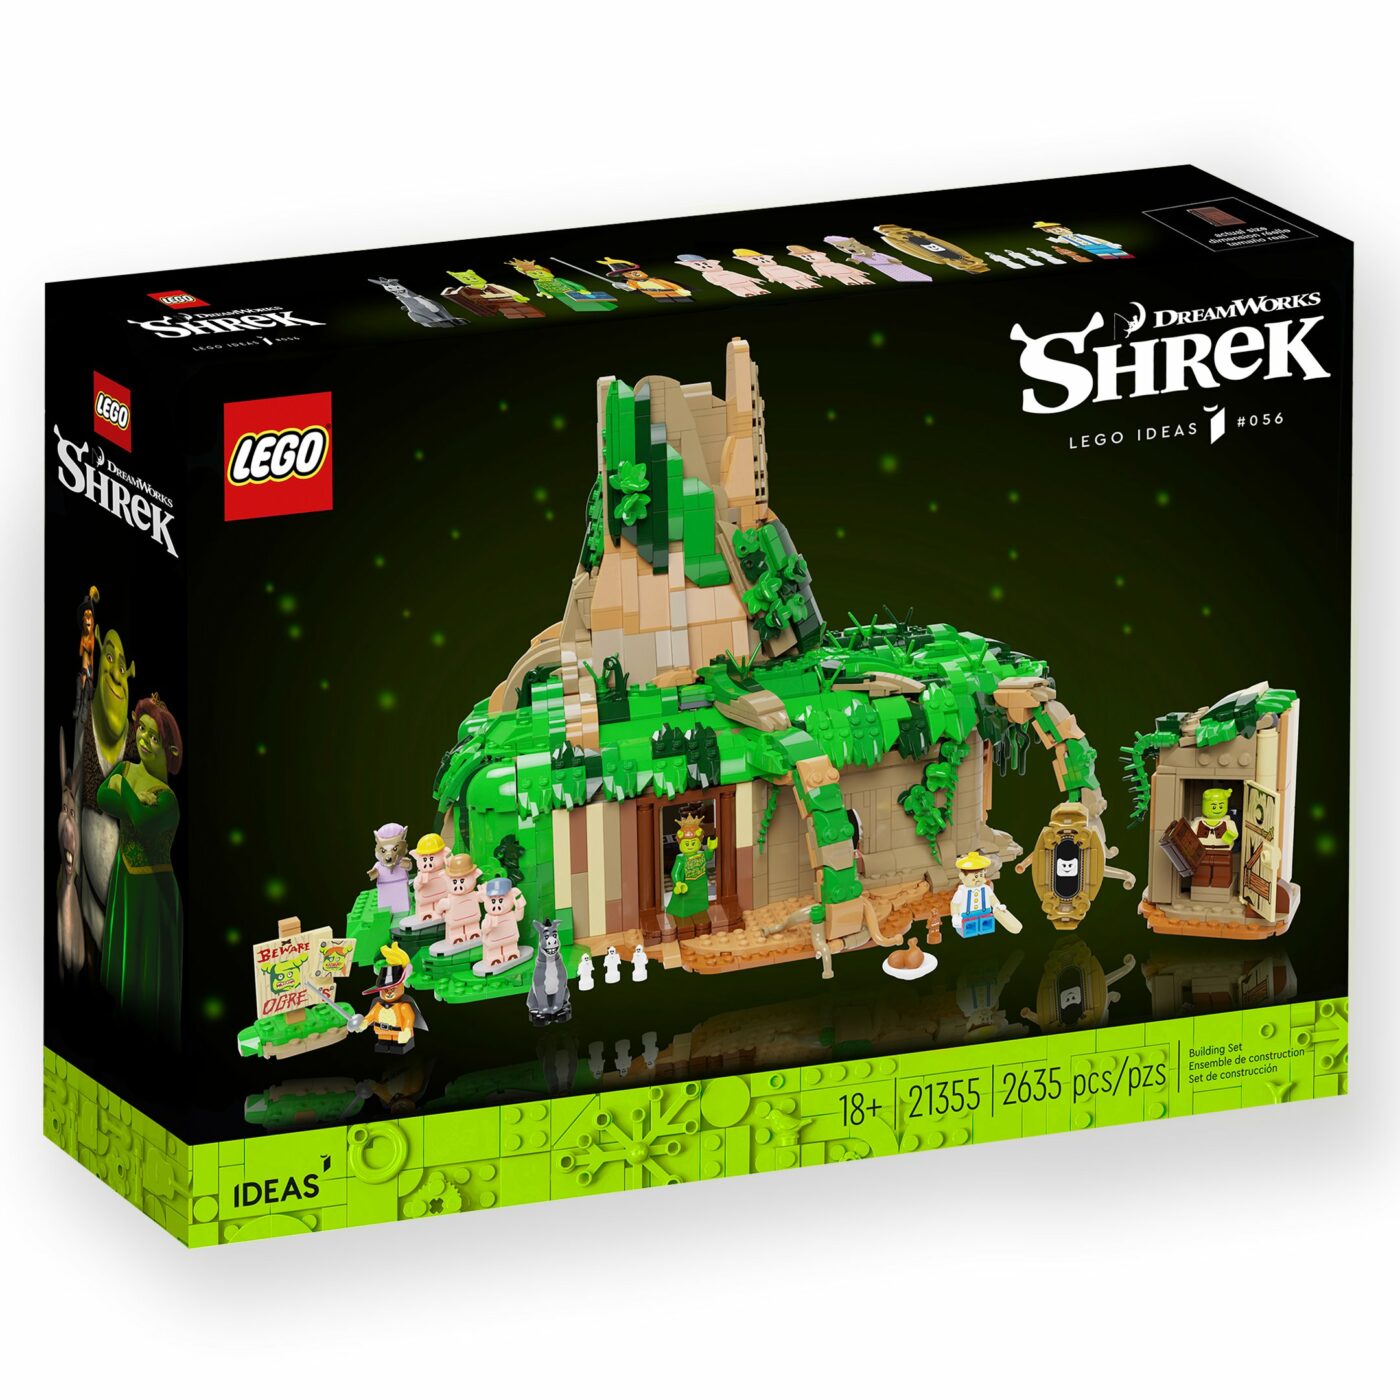 LEGO Shrek set crosses 10,000 votes and could become a future LEGO